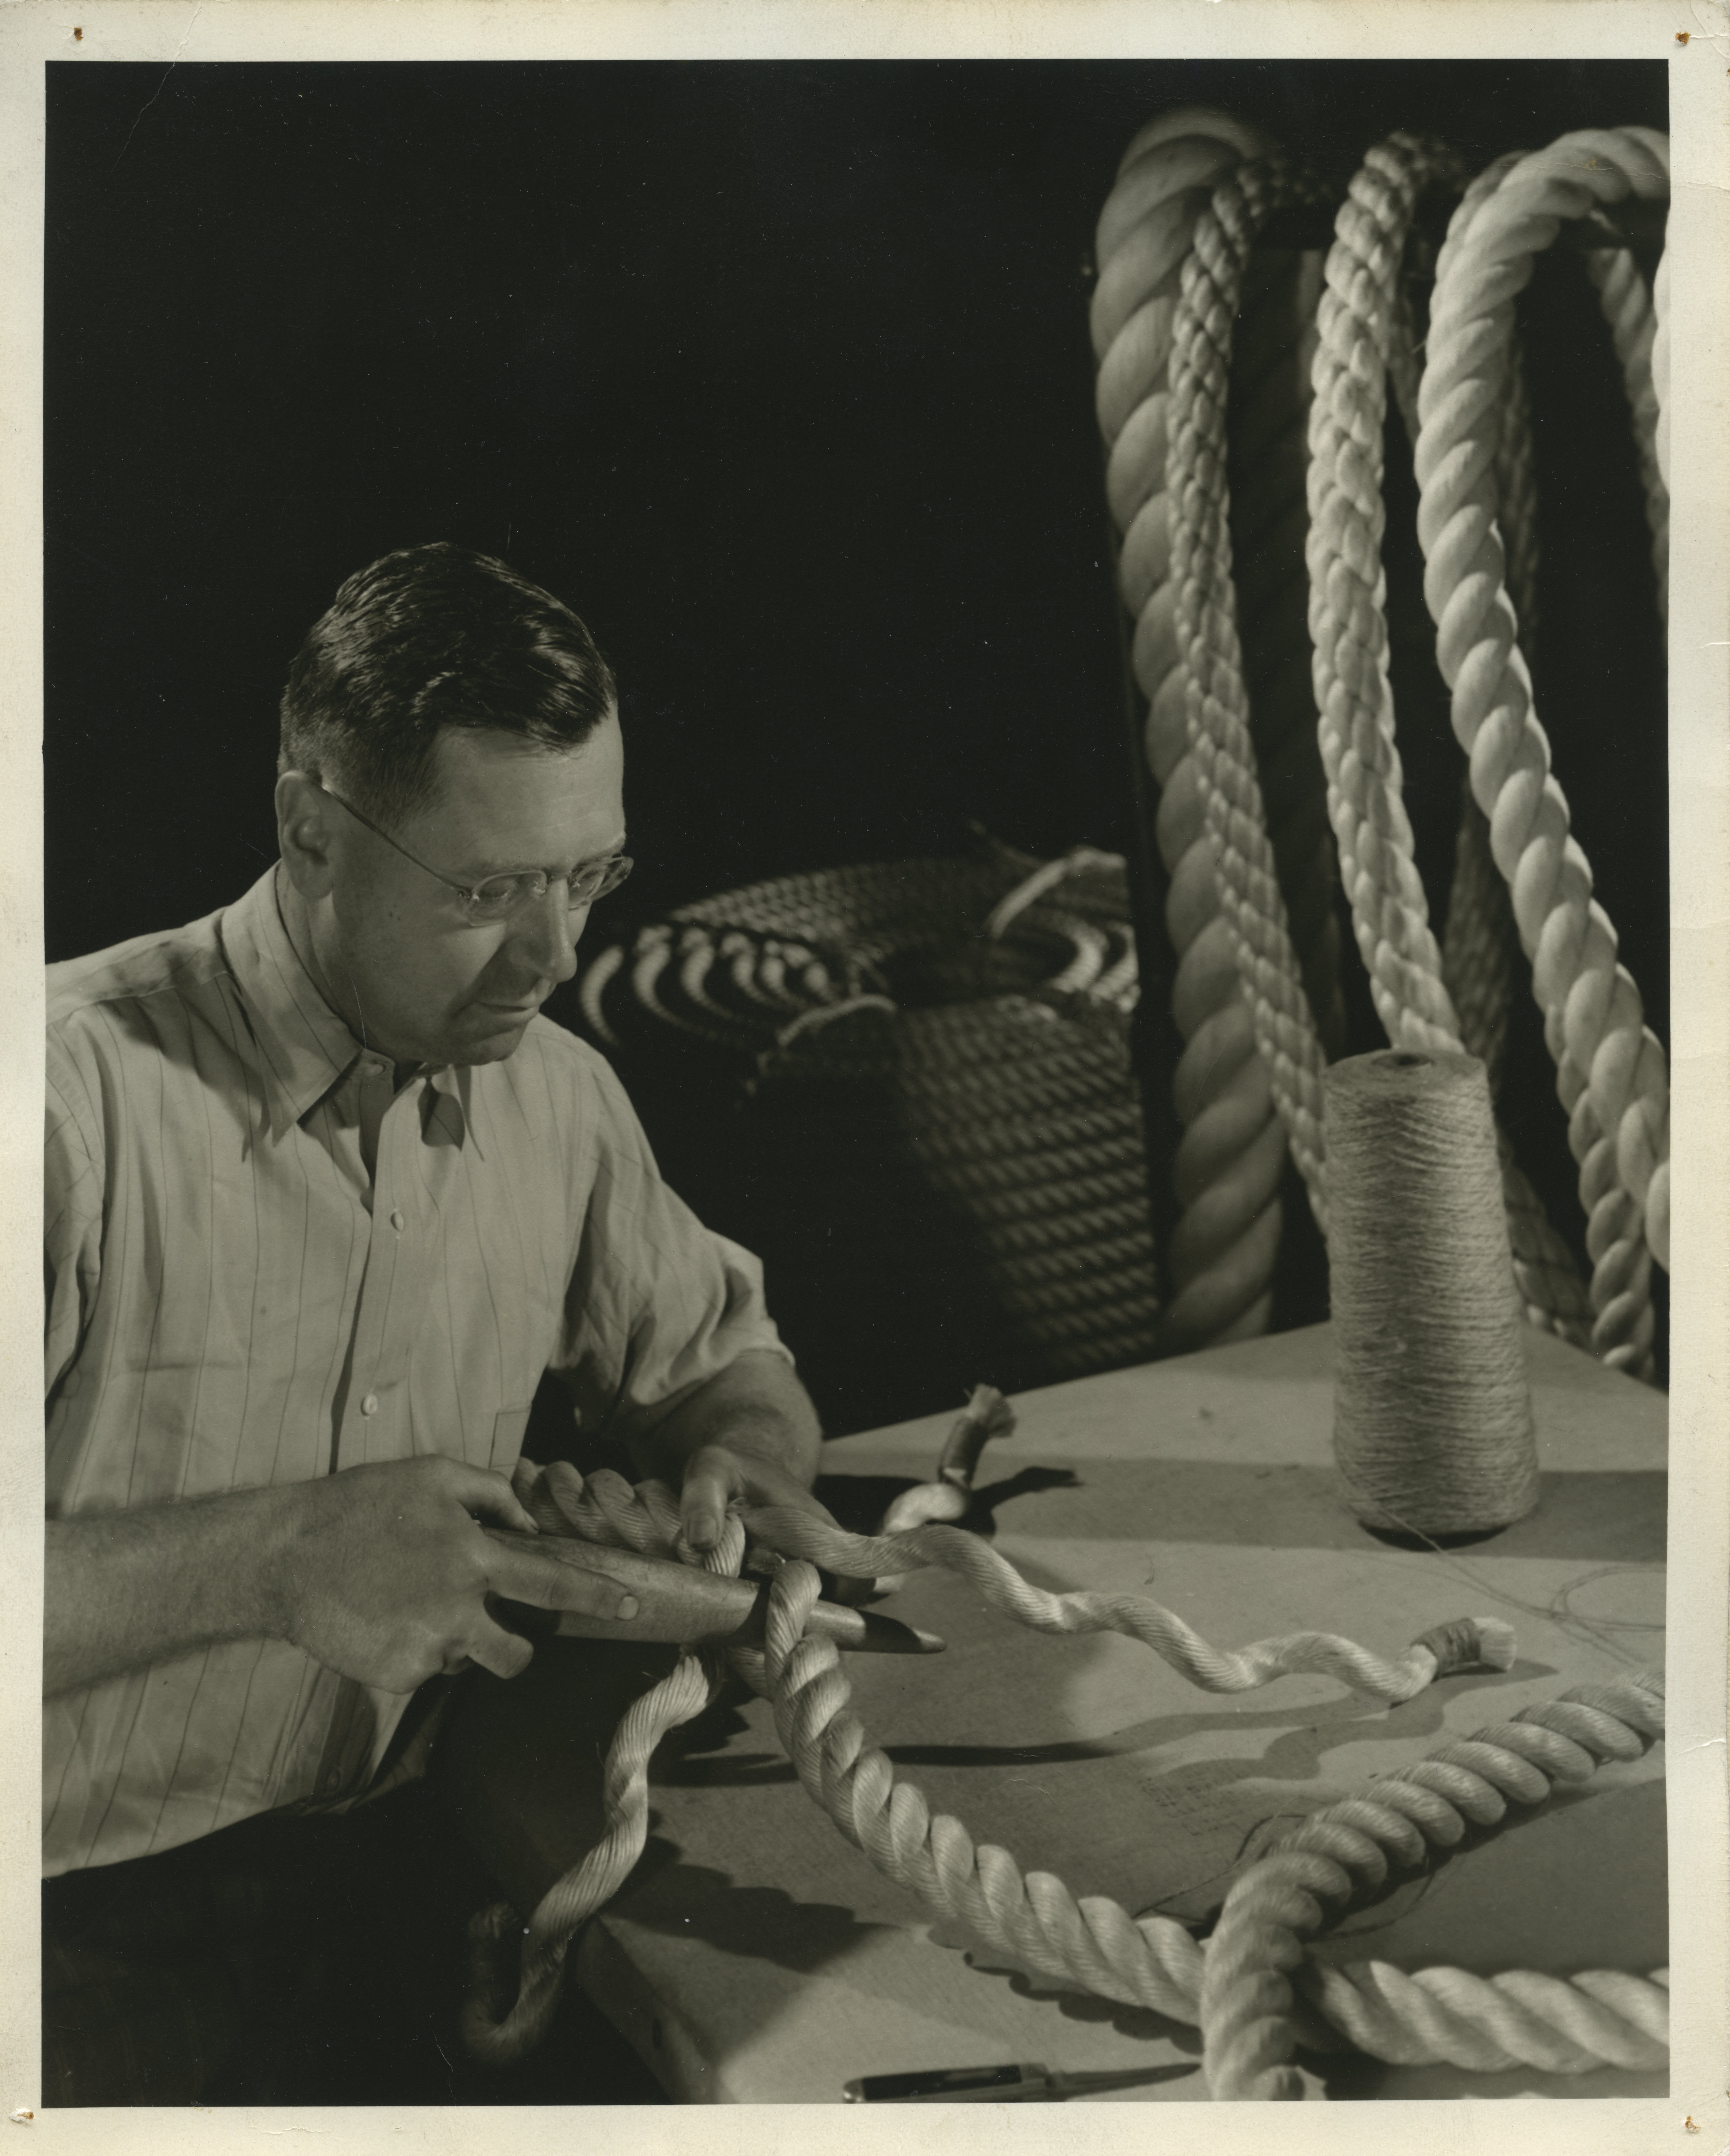 A man demonstrates how to make rope with a tool.